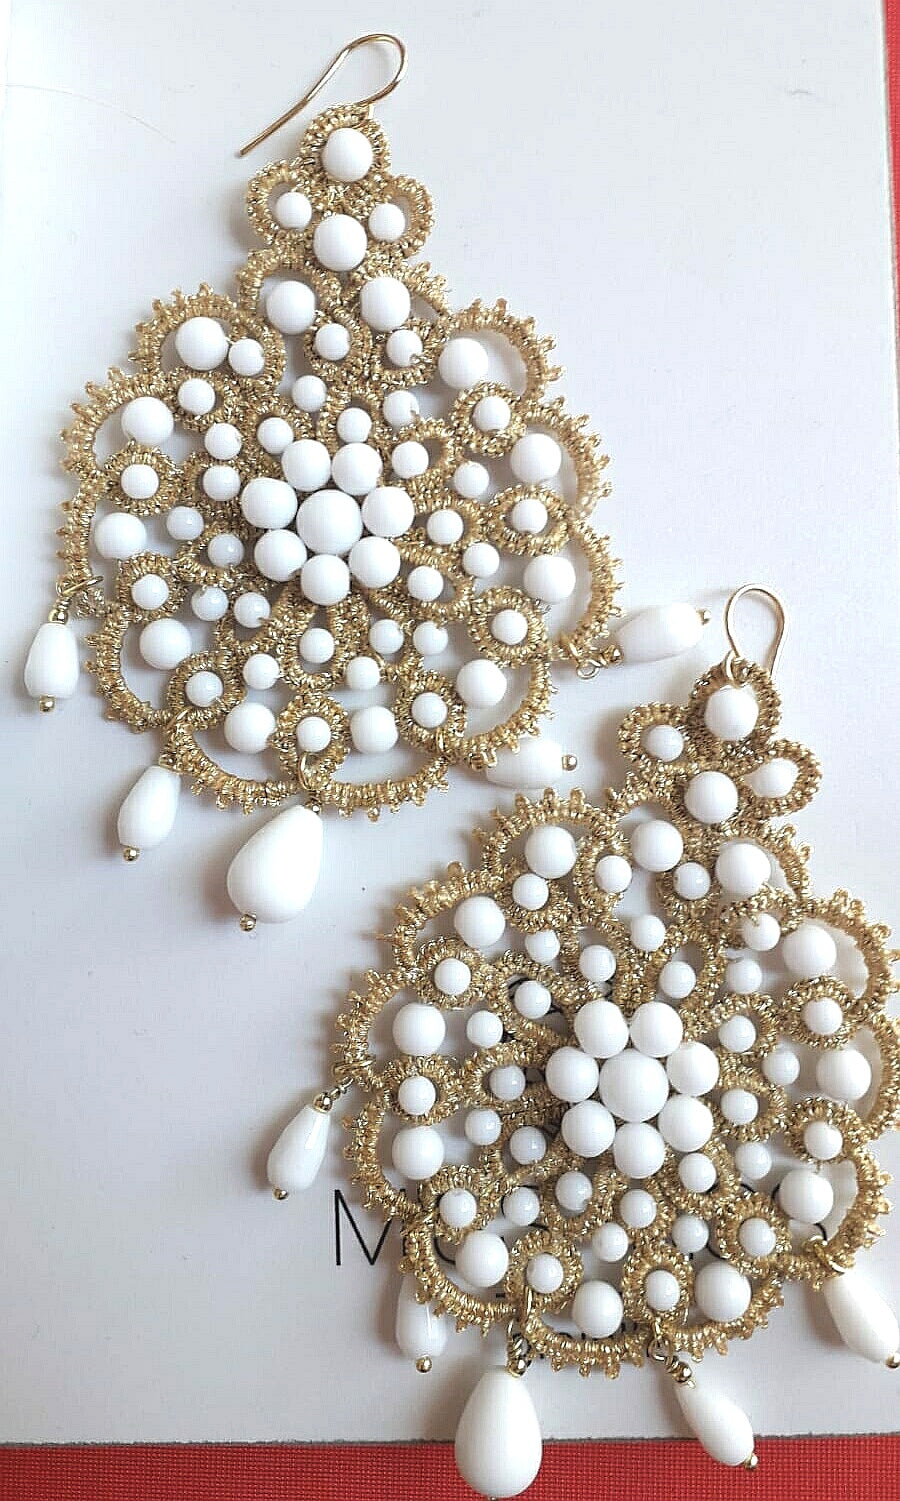 Earrings in chiaccherino lace and white agate